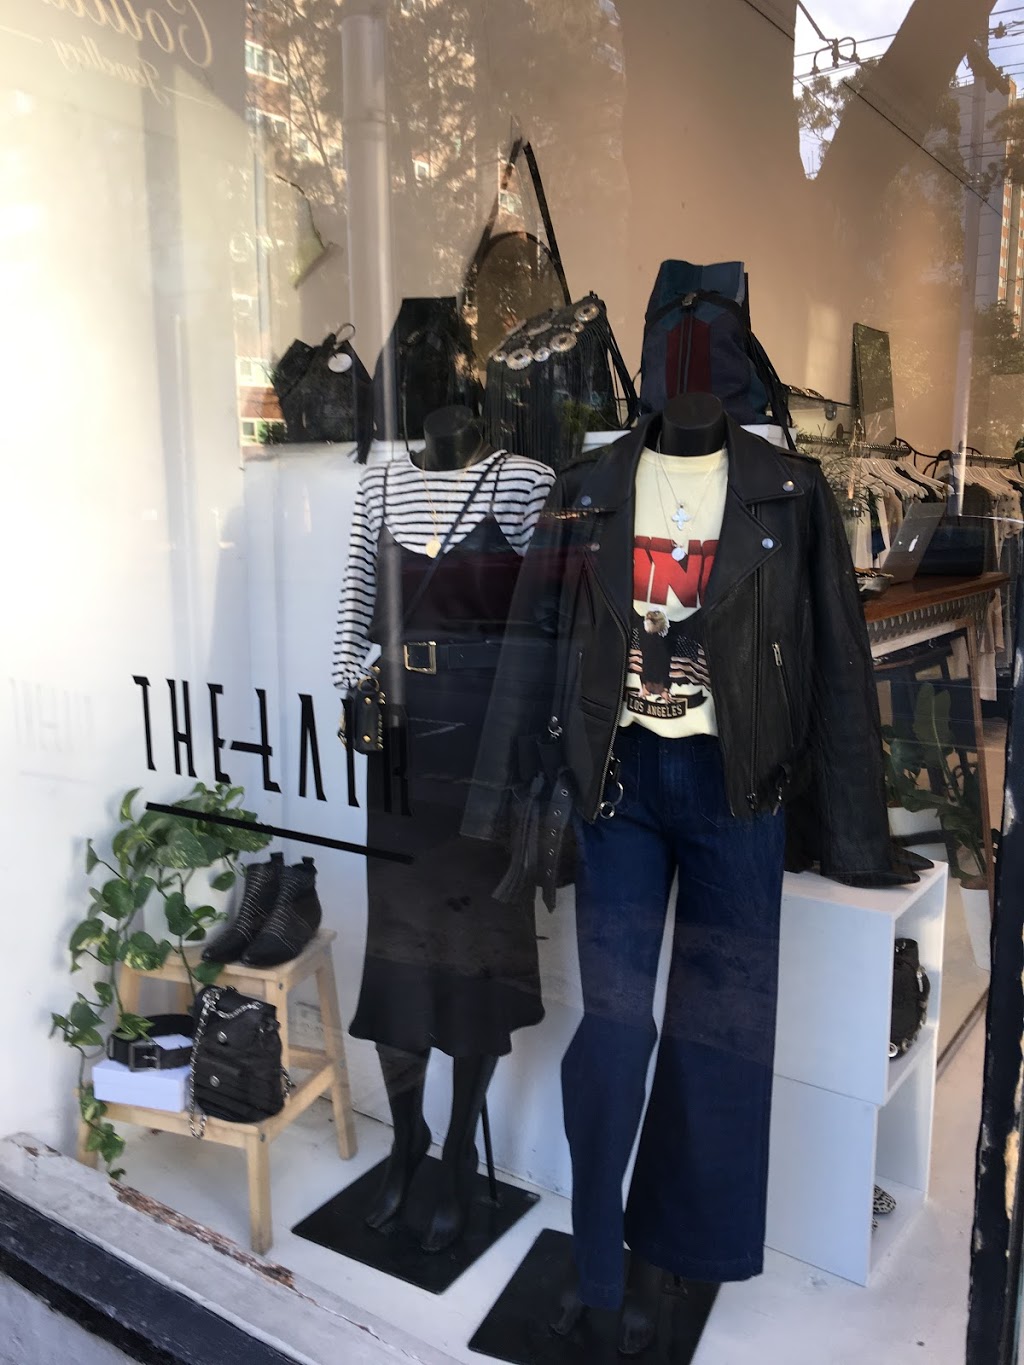 The Lair | clothing store | 122 Gertrude St, Fitzroy VIC 3065, Australia | 0403381730 OR +61 403 381 730